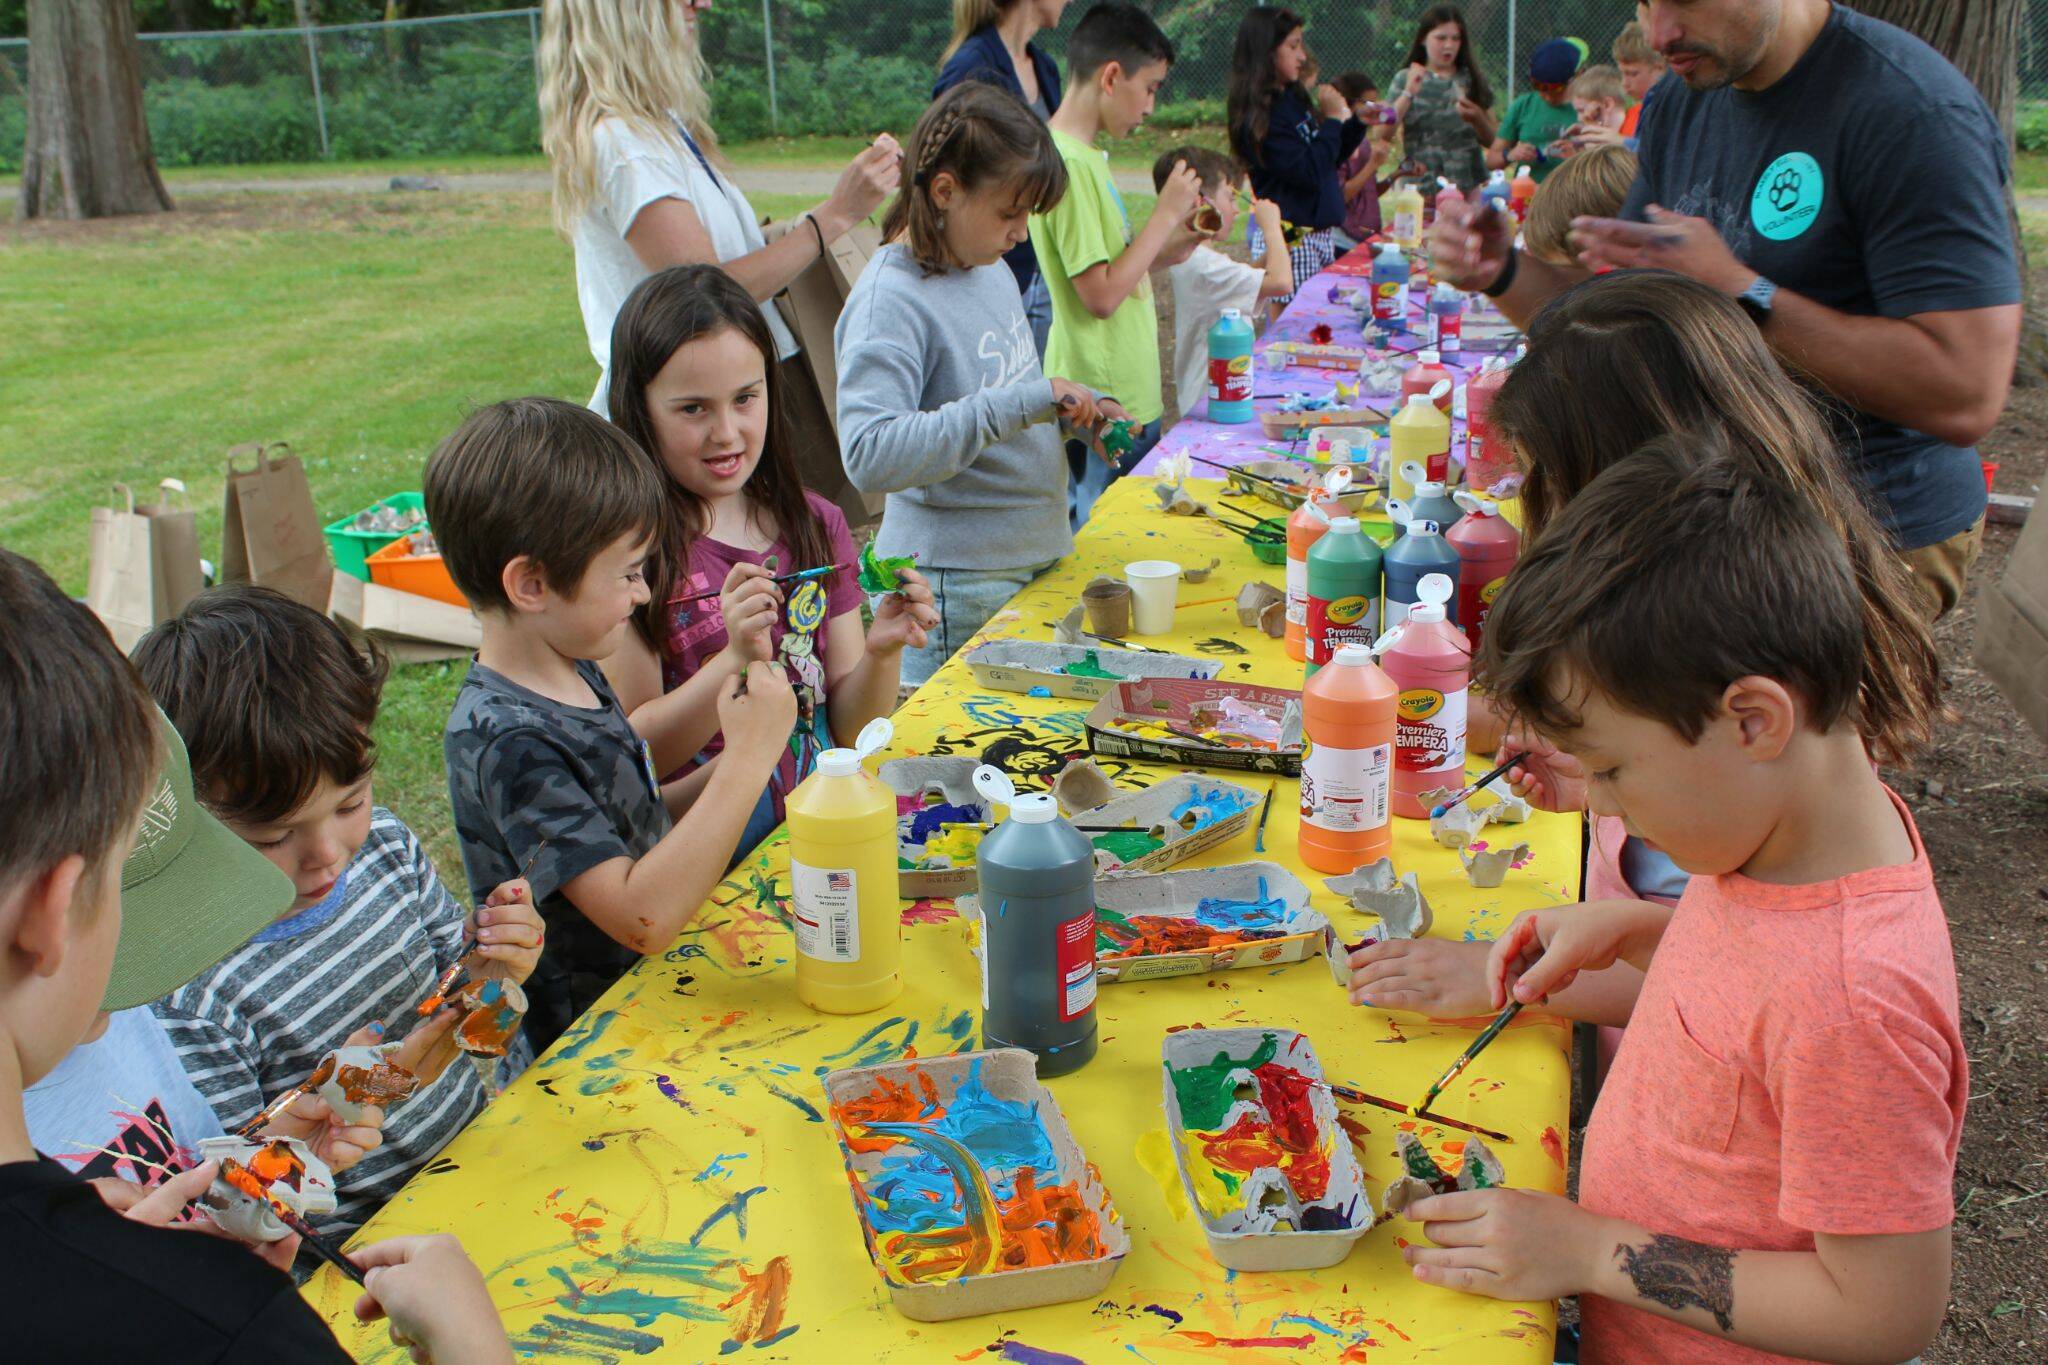 BISD courtesy photo
Students enjoy arts and crafts at the annual Maker Faire.